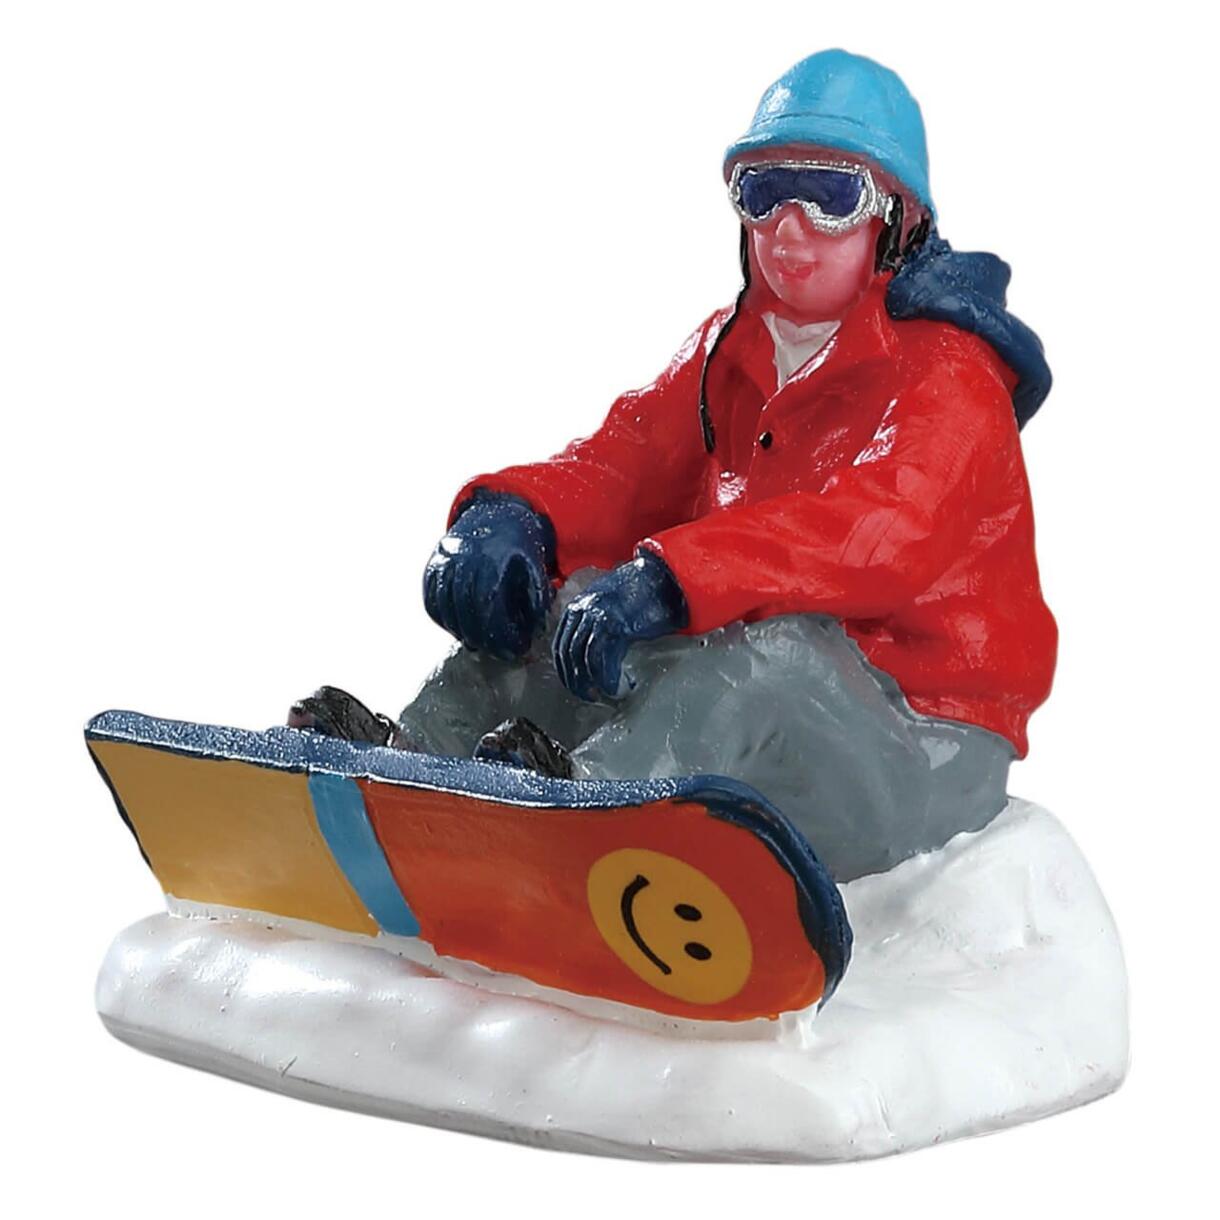 Personages Lemax Snowboarder